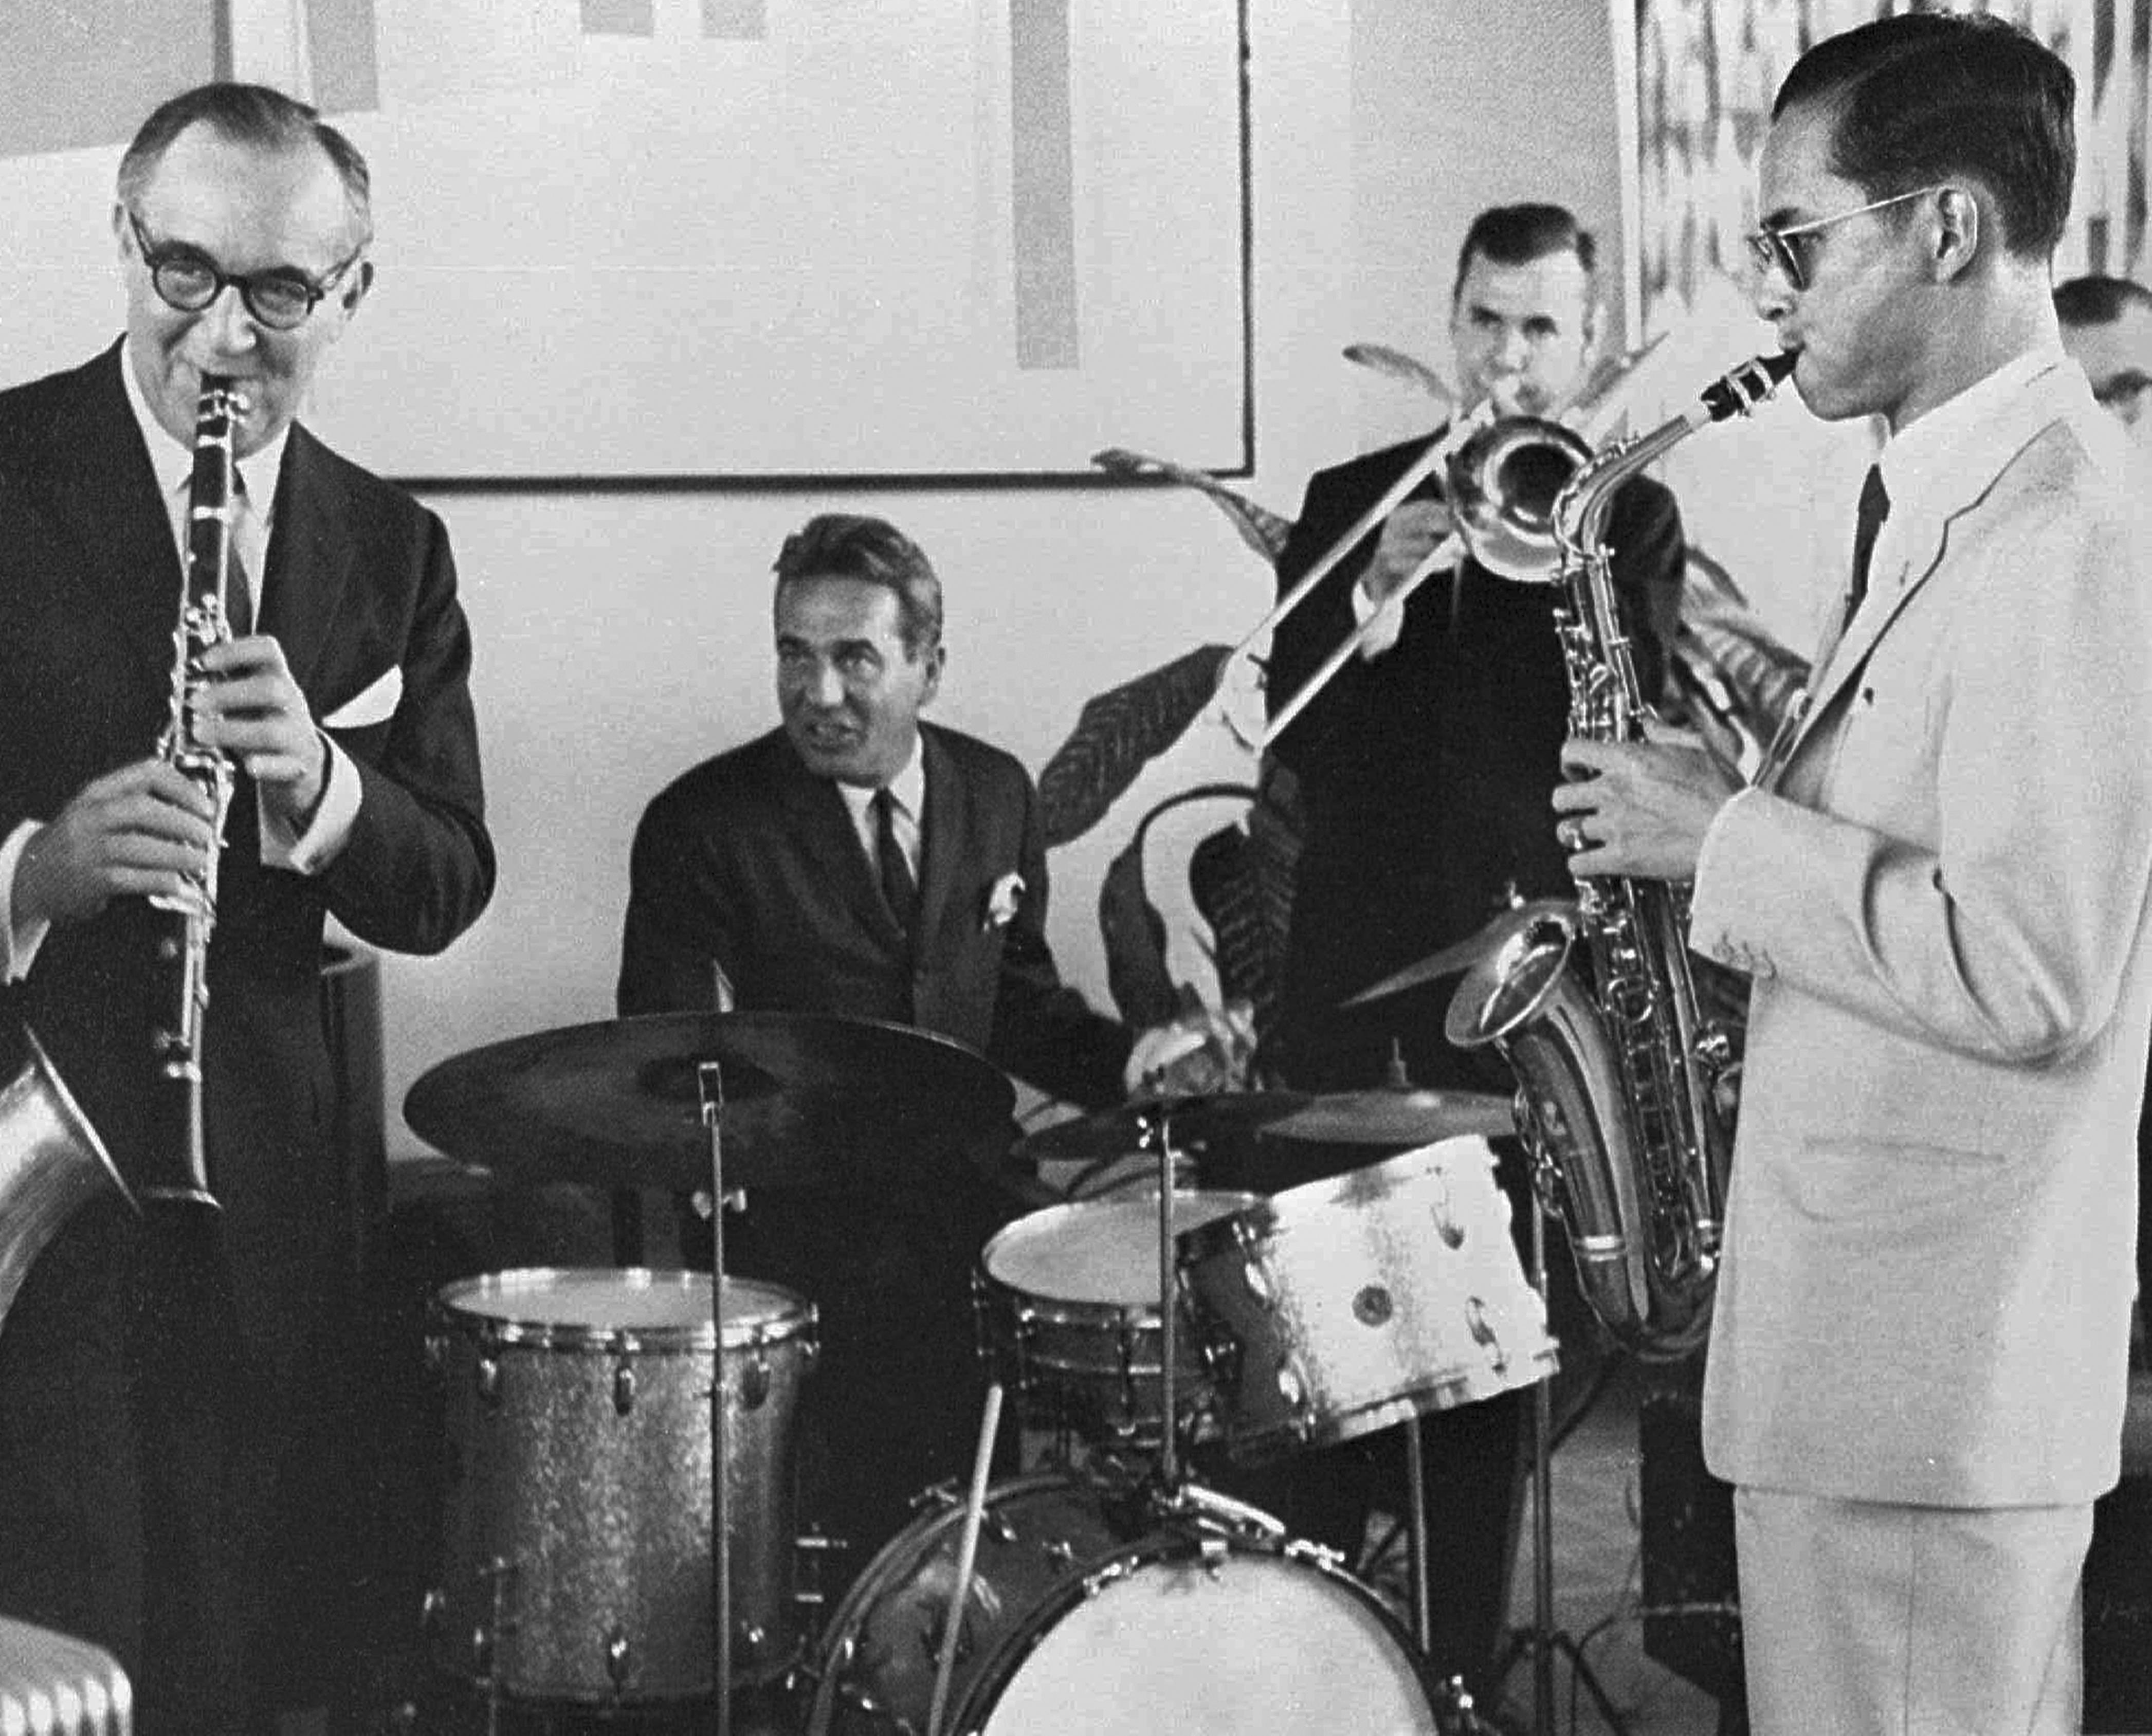 In this July 5, 1960, file photo, Thailand's King Bhumibol Adulyadej, right, plays the saxophone during a jam session with legendary jazz clarinetist Benny Goodman, left, drummer Gene Krupa, second left, and trombonist Urbie Green in New York. (Bureau of the Royal Household via AP, File)